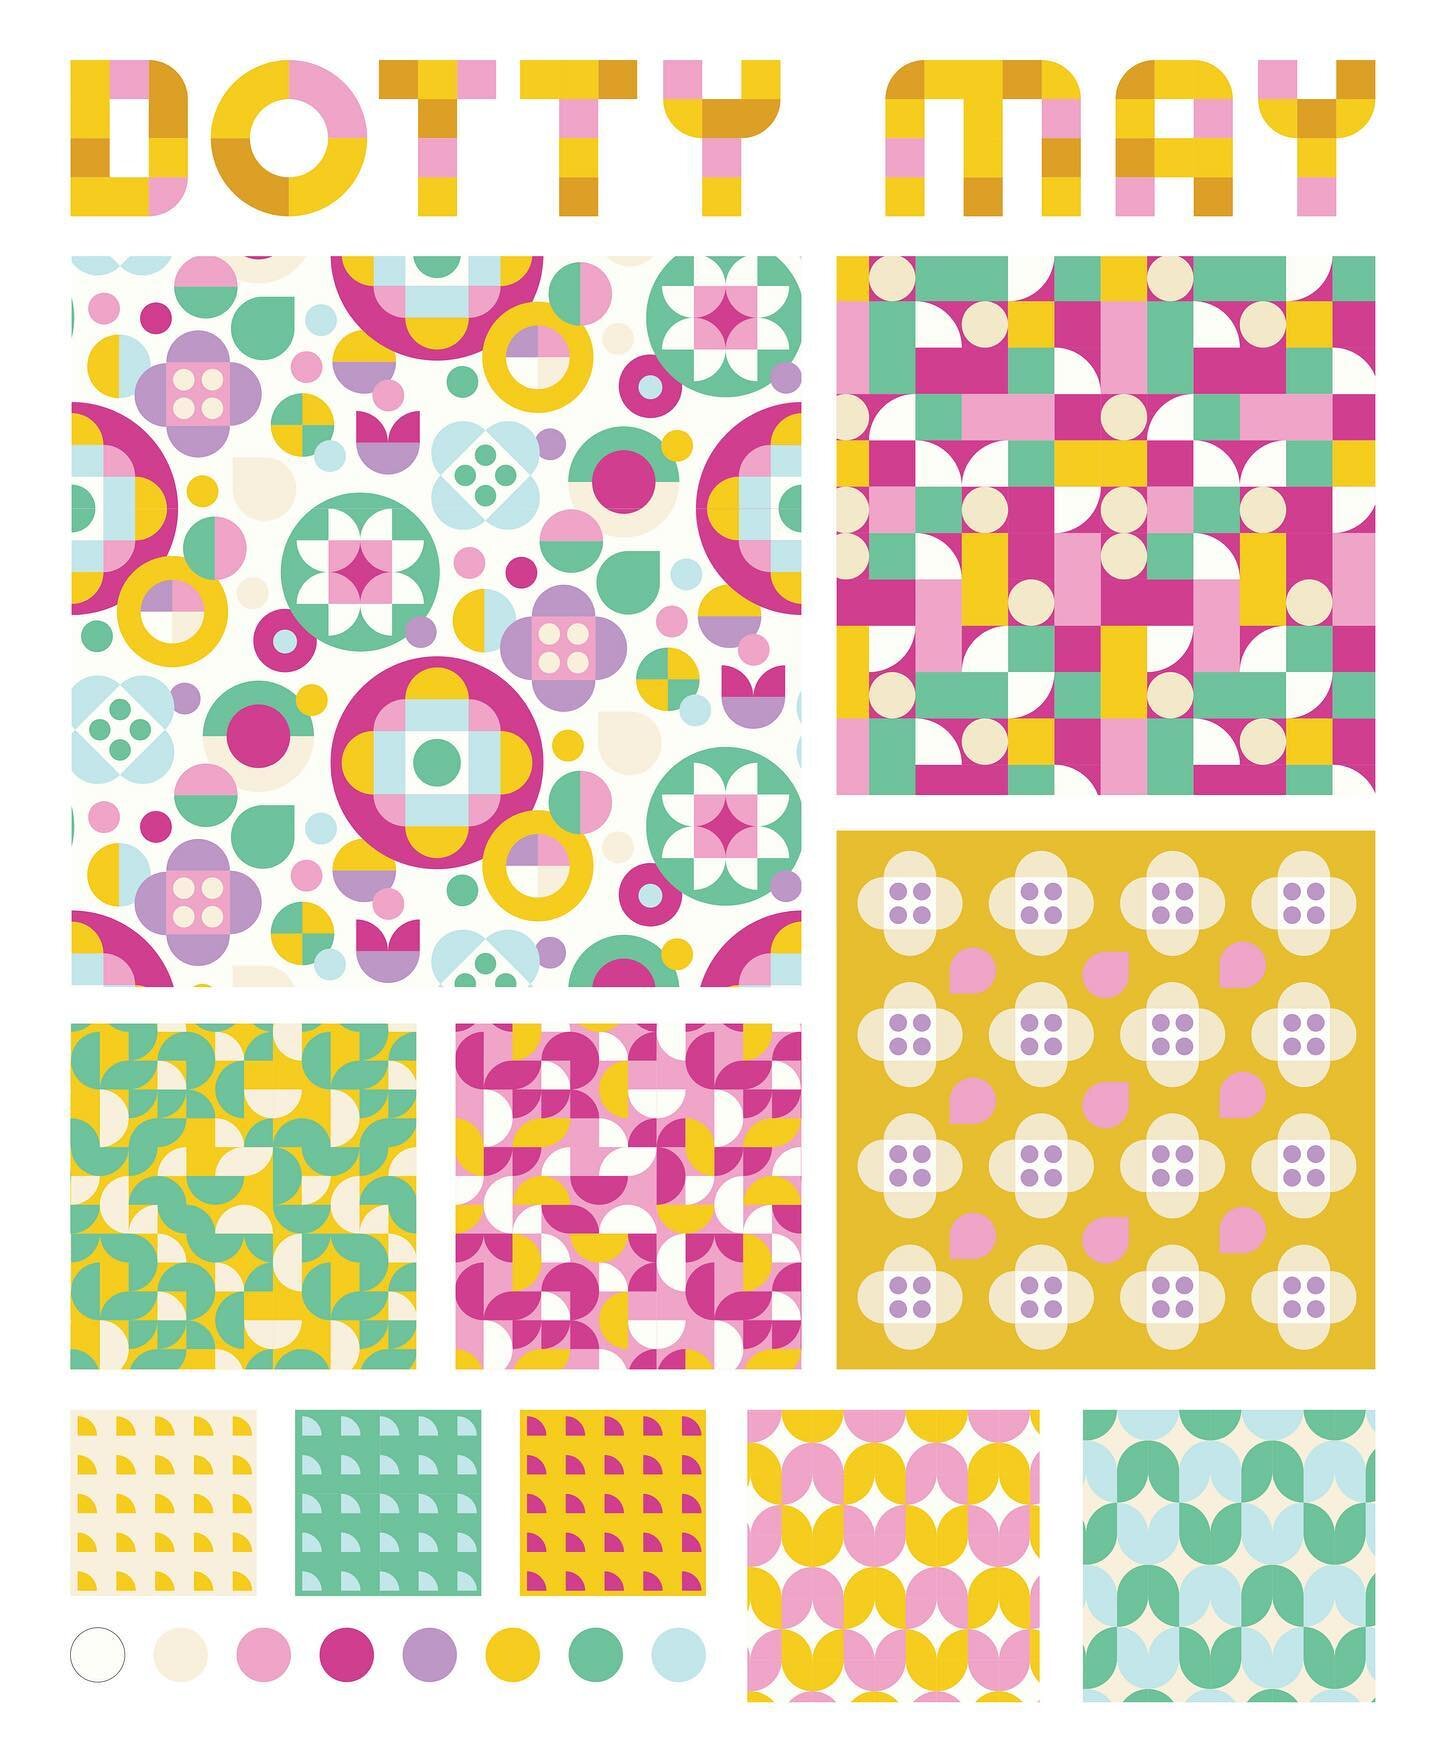 DOTTY MAY Pattern Play - I designed these patterns in the summer of 2020, based on the photo frame I made with @lego DOTS. Creating patterns is such a fun design challenge - playing with color, shapes and size. I&rsquo;ve learned it&rsquo;s best to h